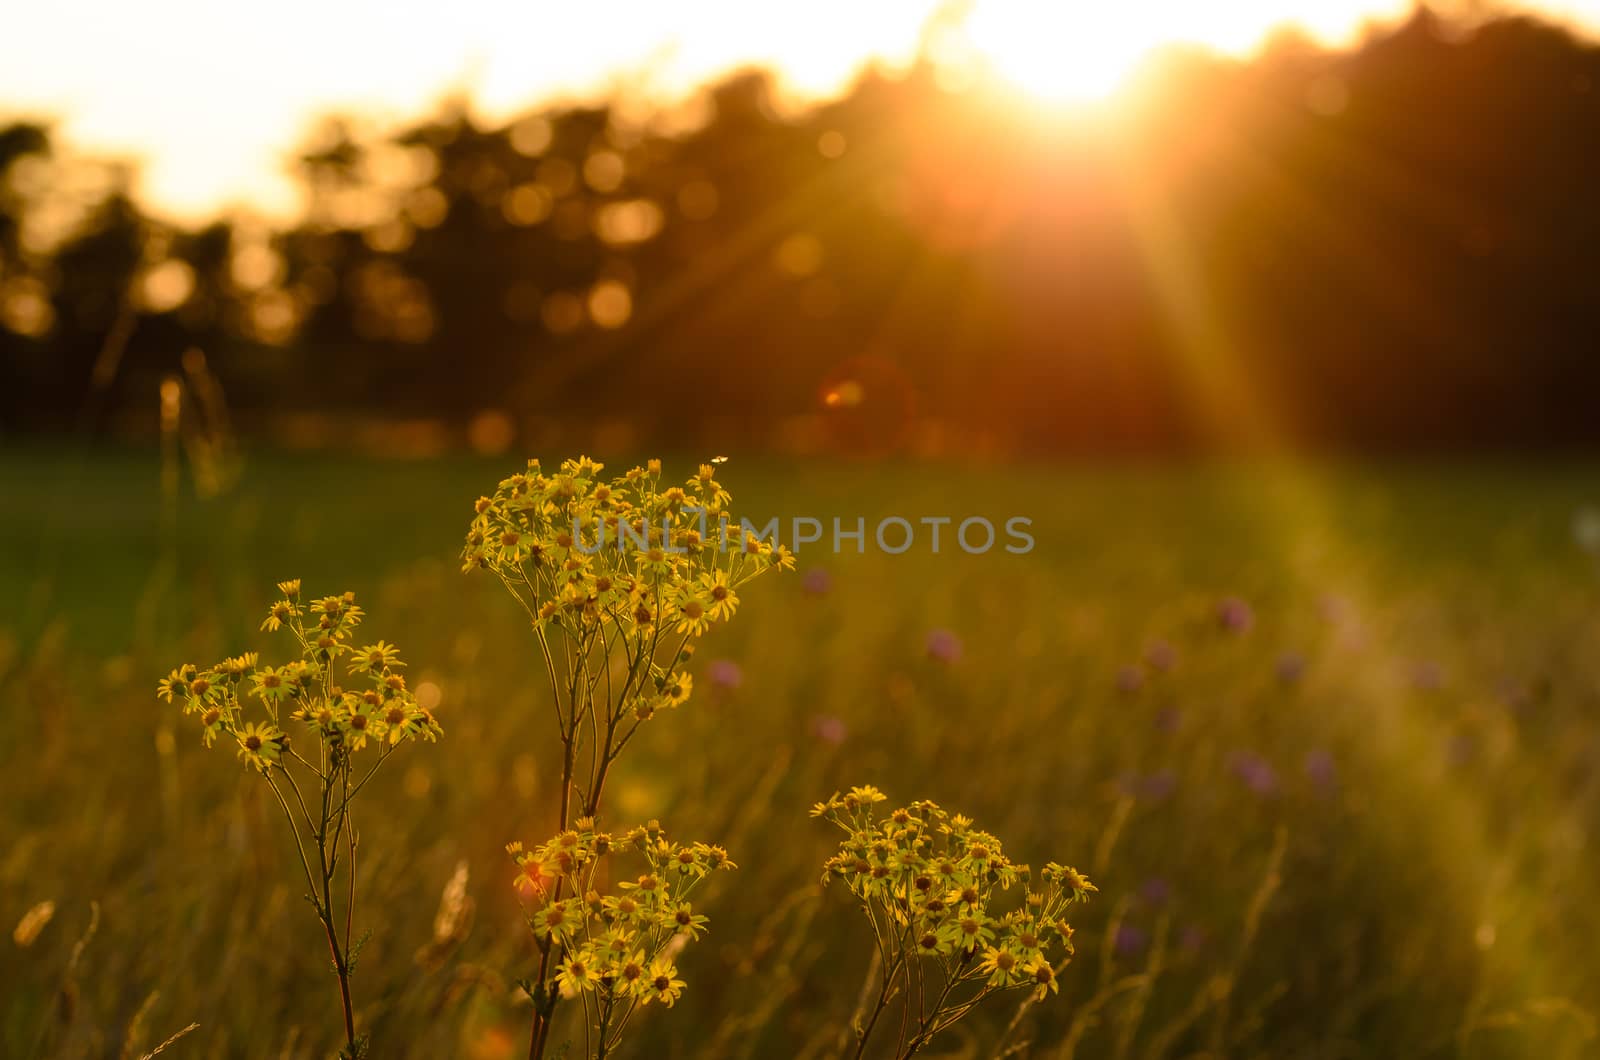 Beautiful nature in Drenthe. Everwhere you look you find these wild flowers. They look lovely during the evening golden light.